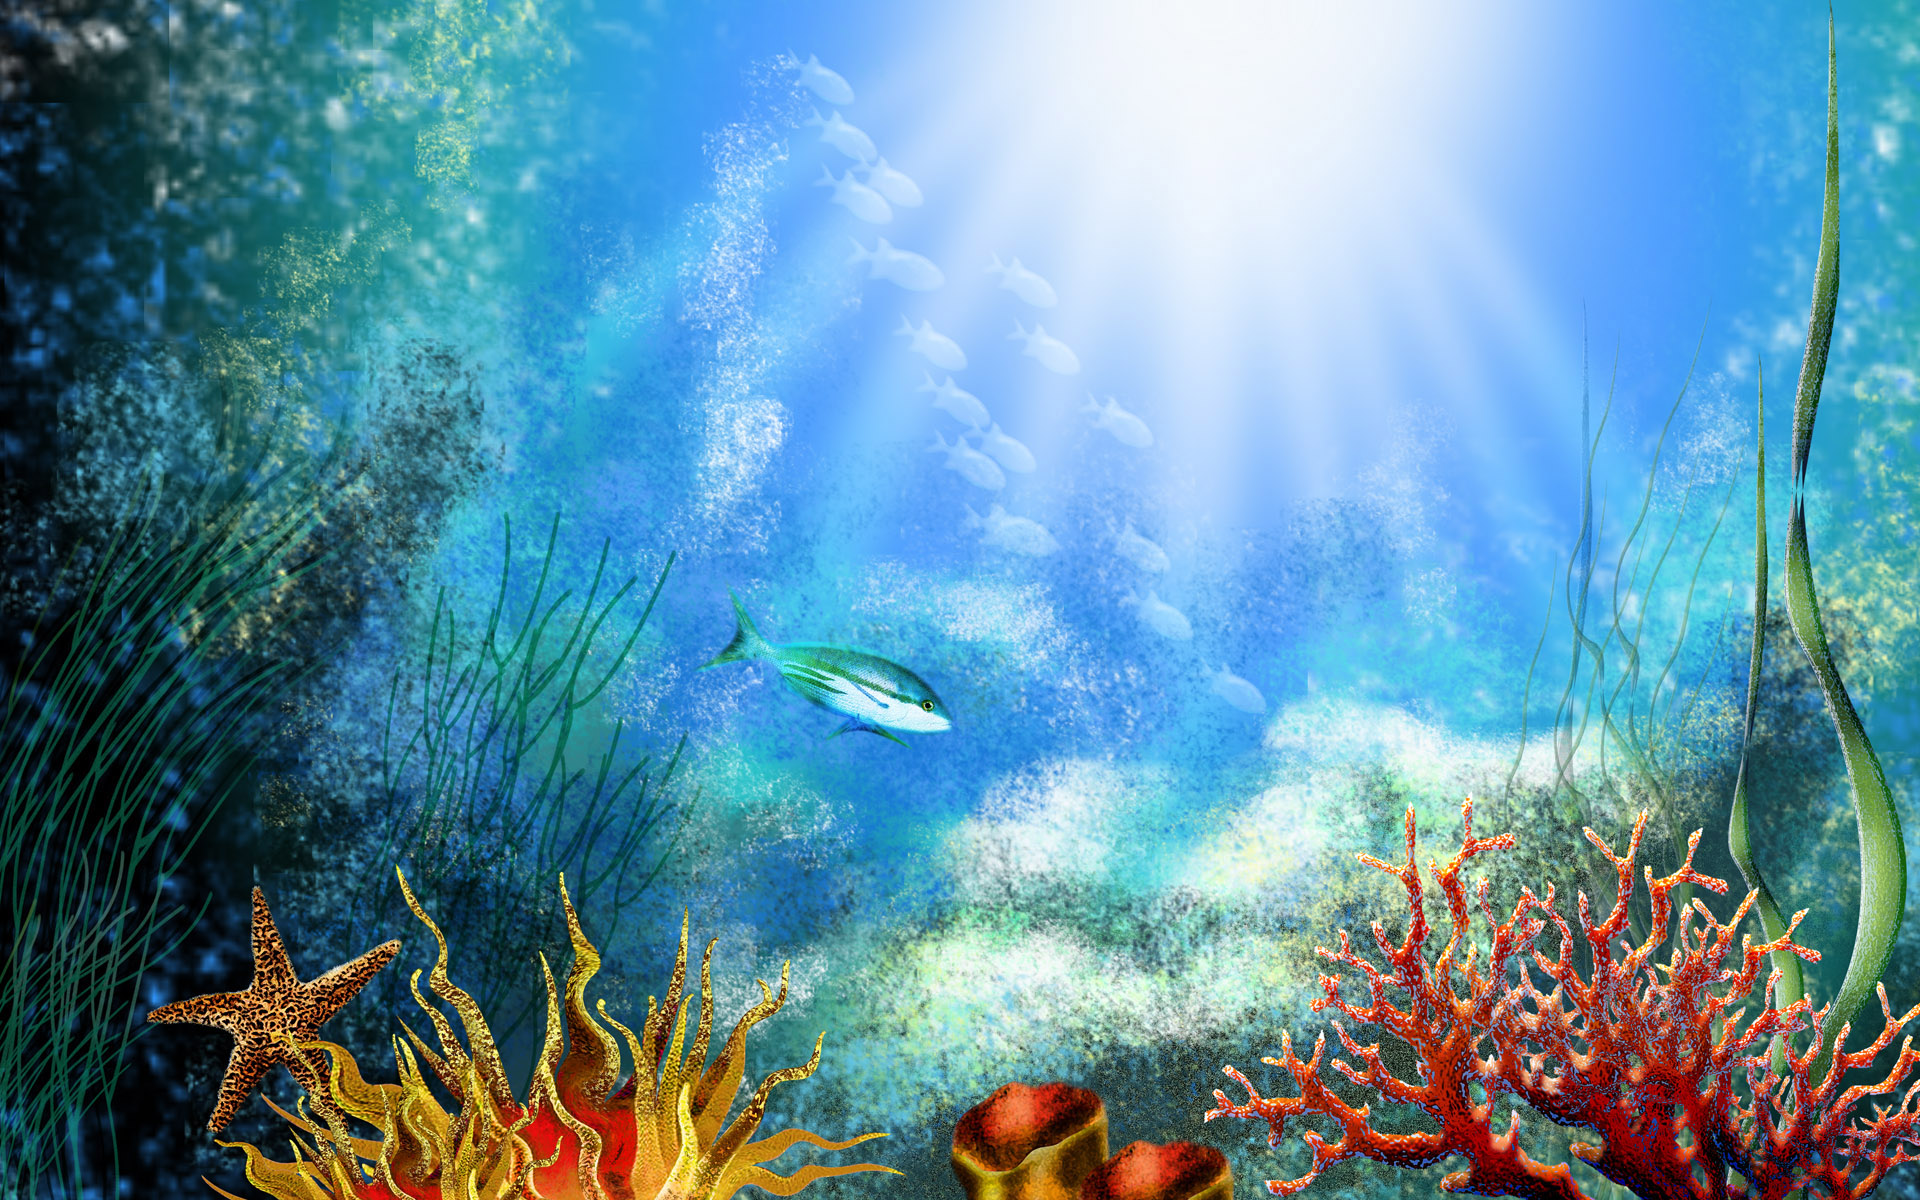 underwater environment holds an irresistible charm for many Feel free